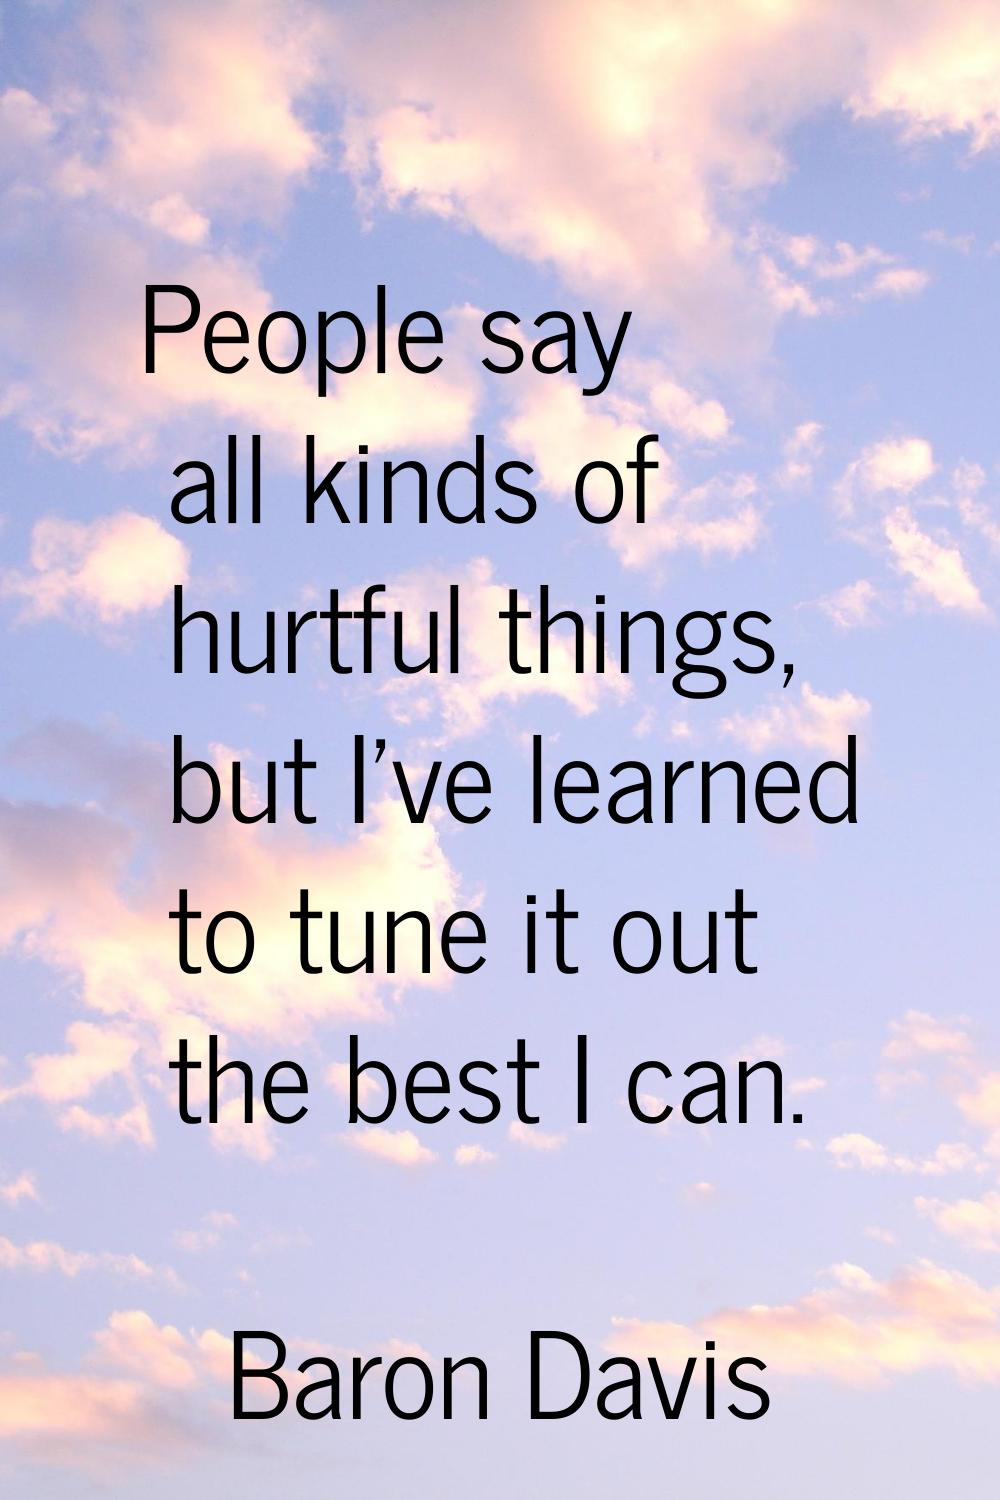 People say all kinds of hurtful things, but I've learned to tune it out the best I can.